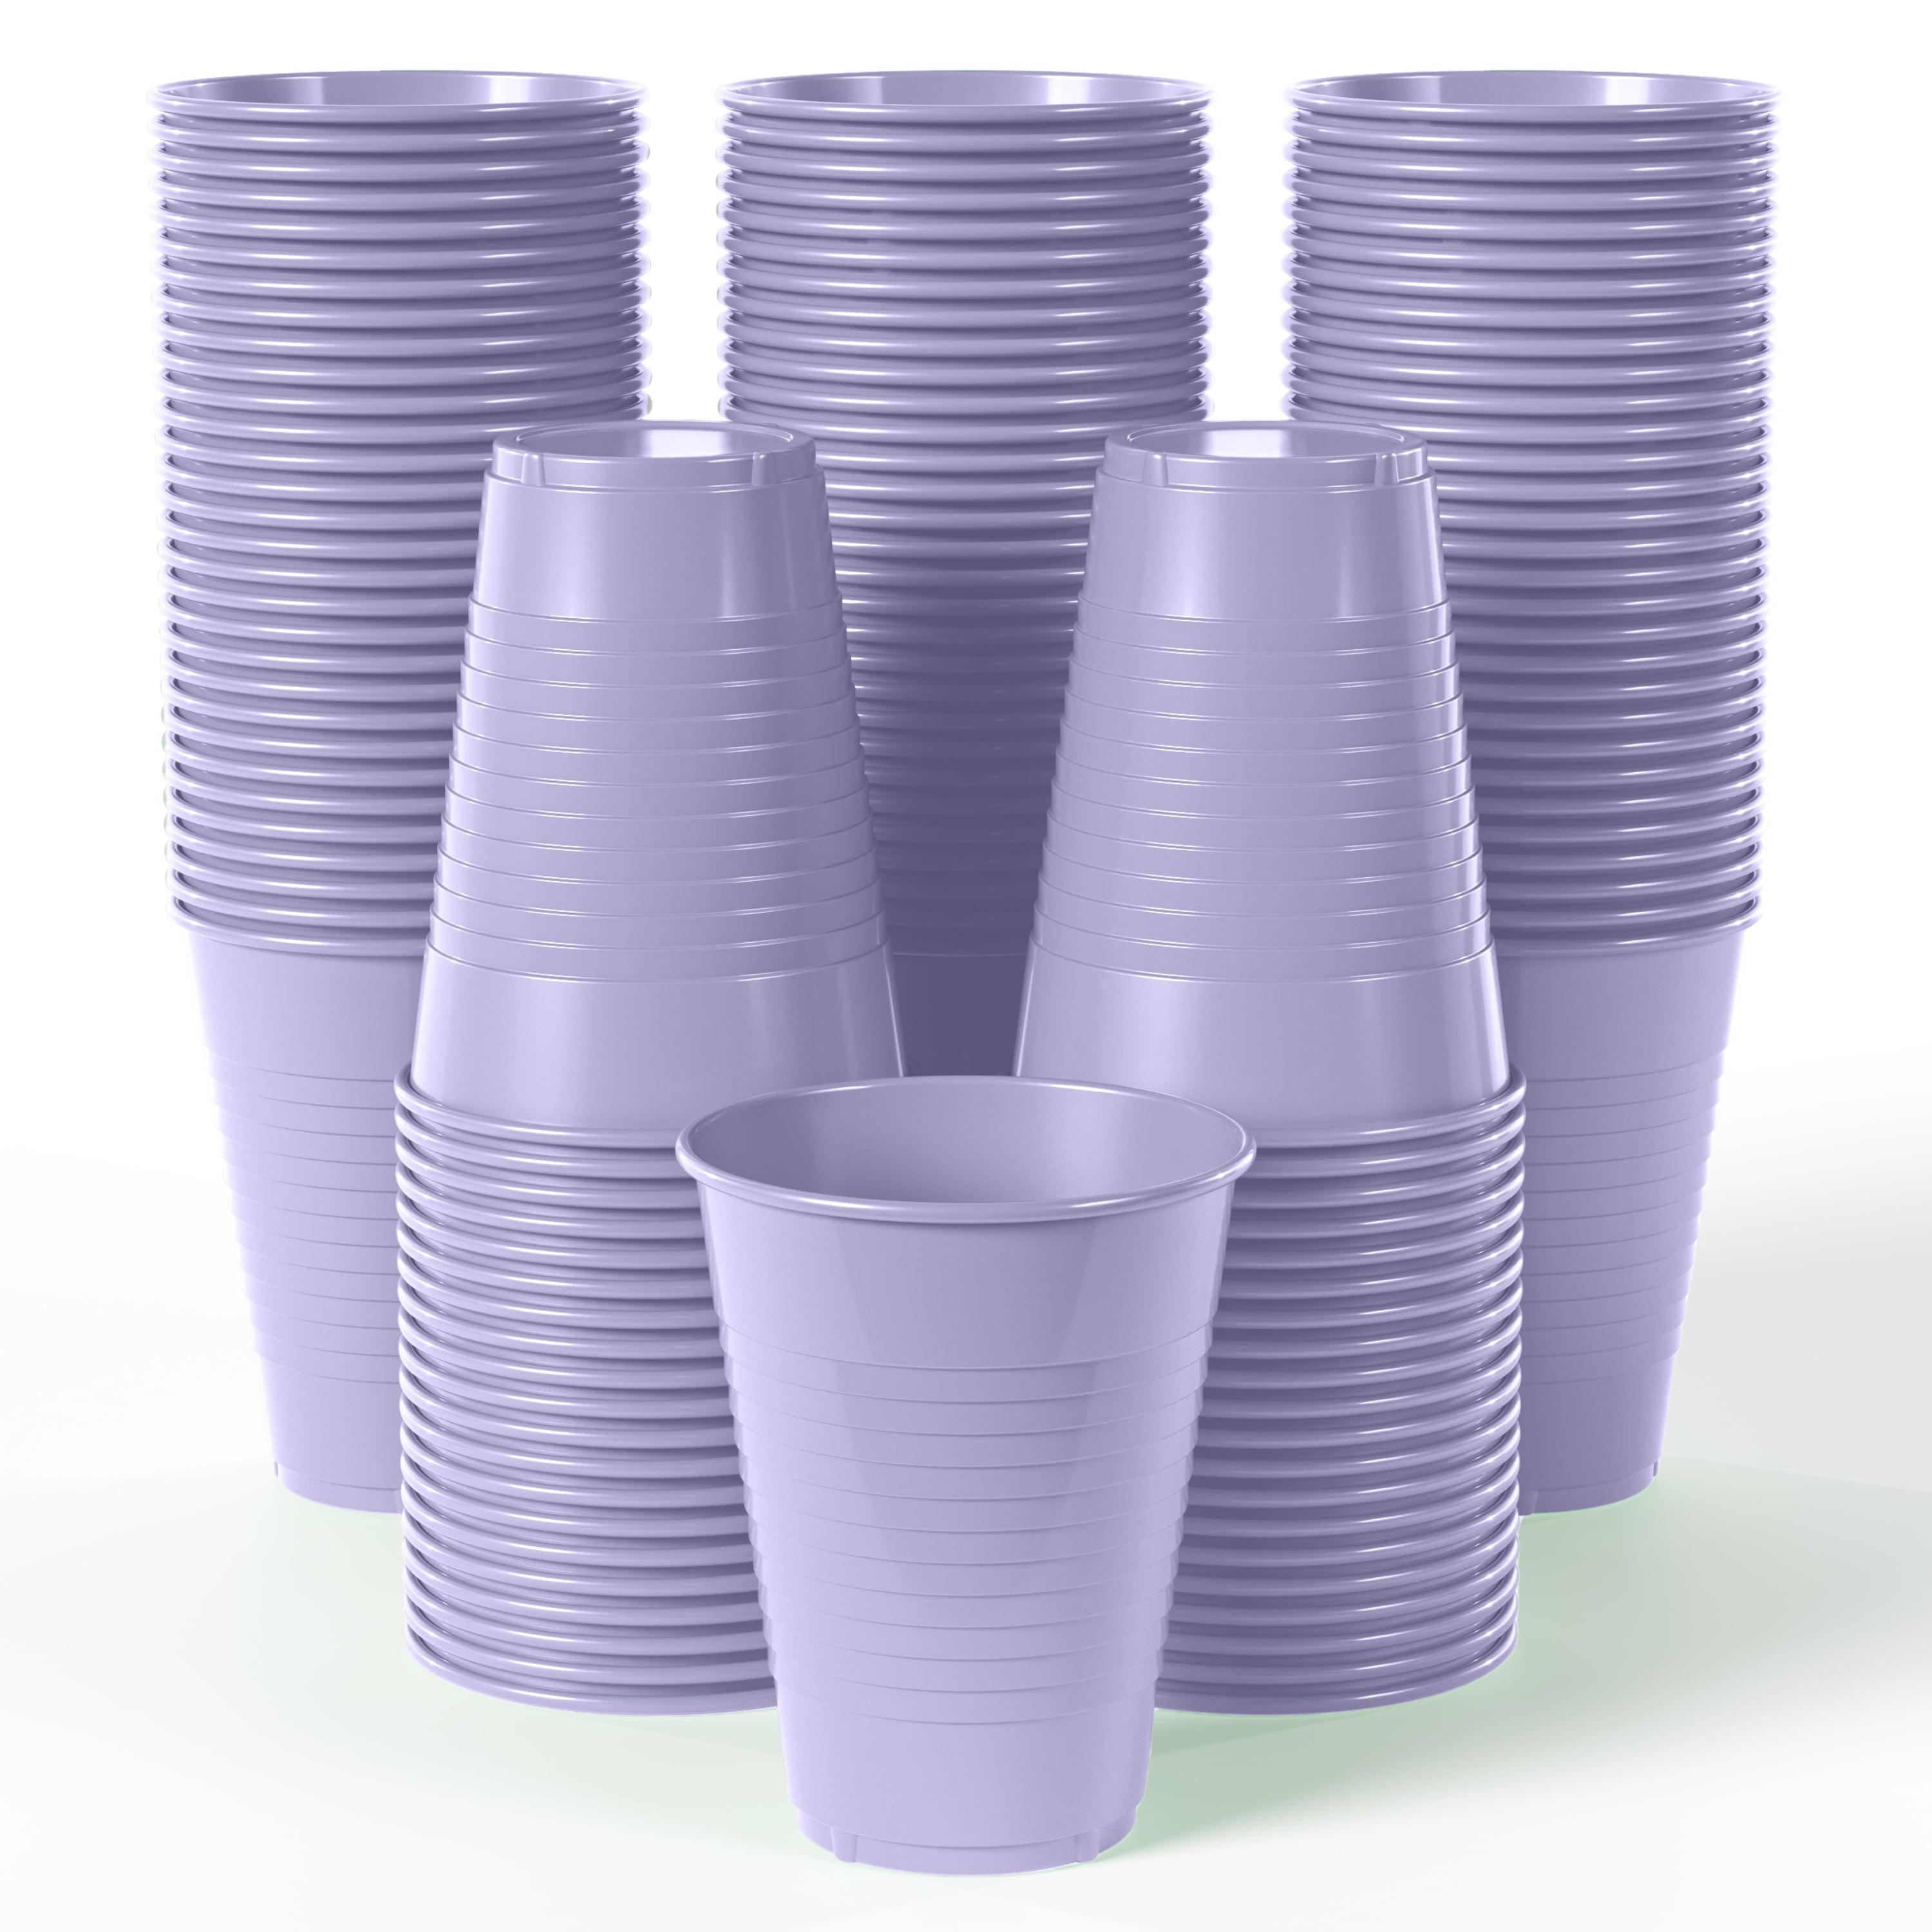 Green Disposable Plastic Cups [100 Pack 16 oz.] Party & Fun Pong Cups - Durable Cups for Water, Beer, Booze, Smoothie, Games - Large Cold Drink Cups